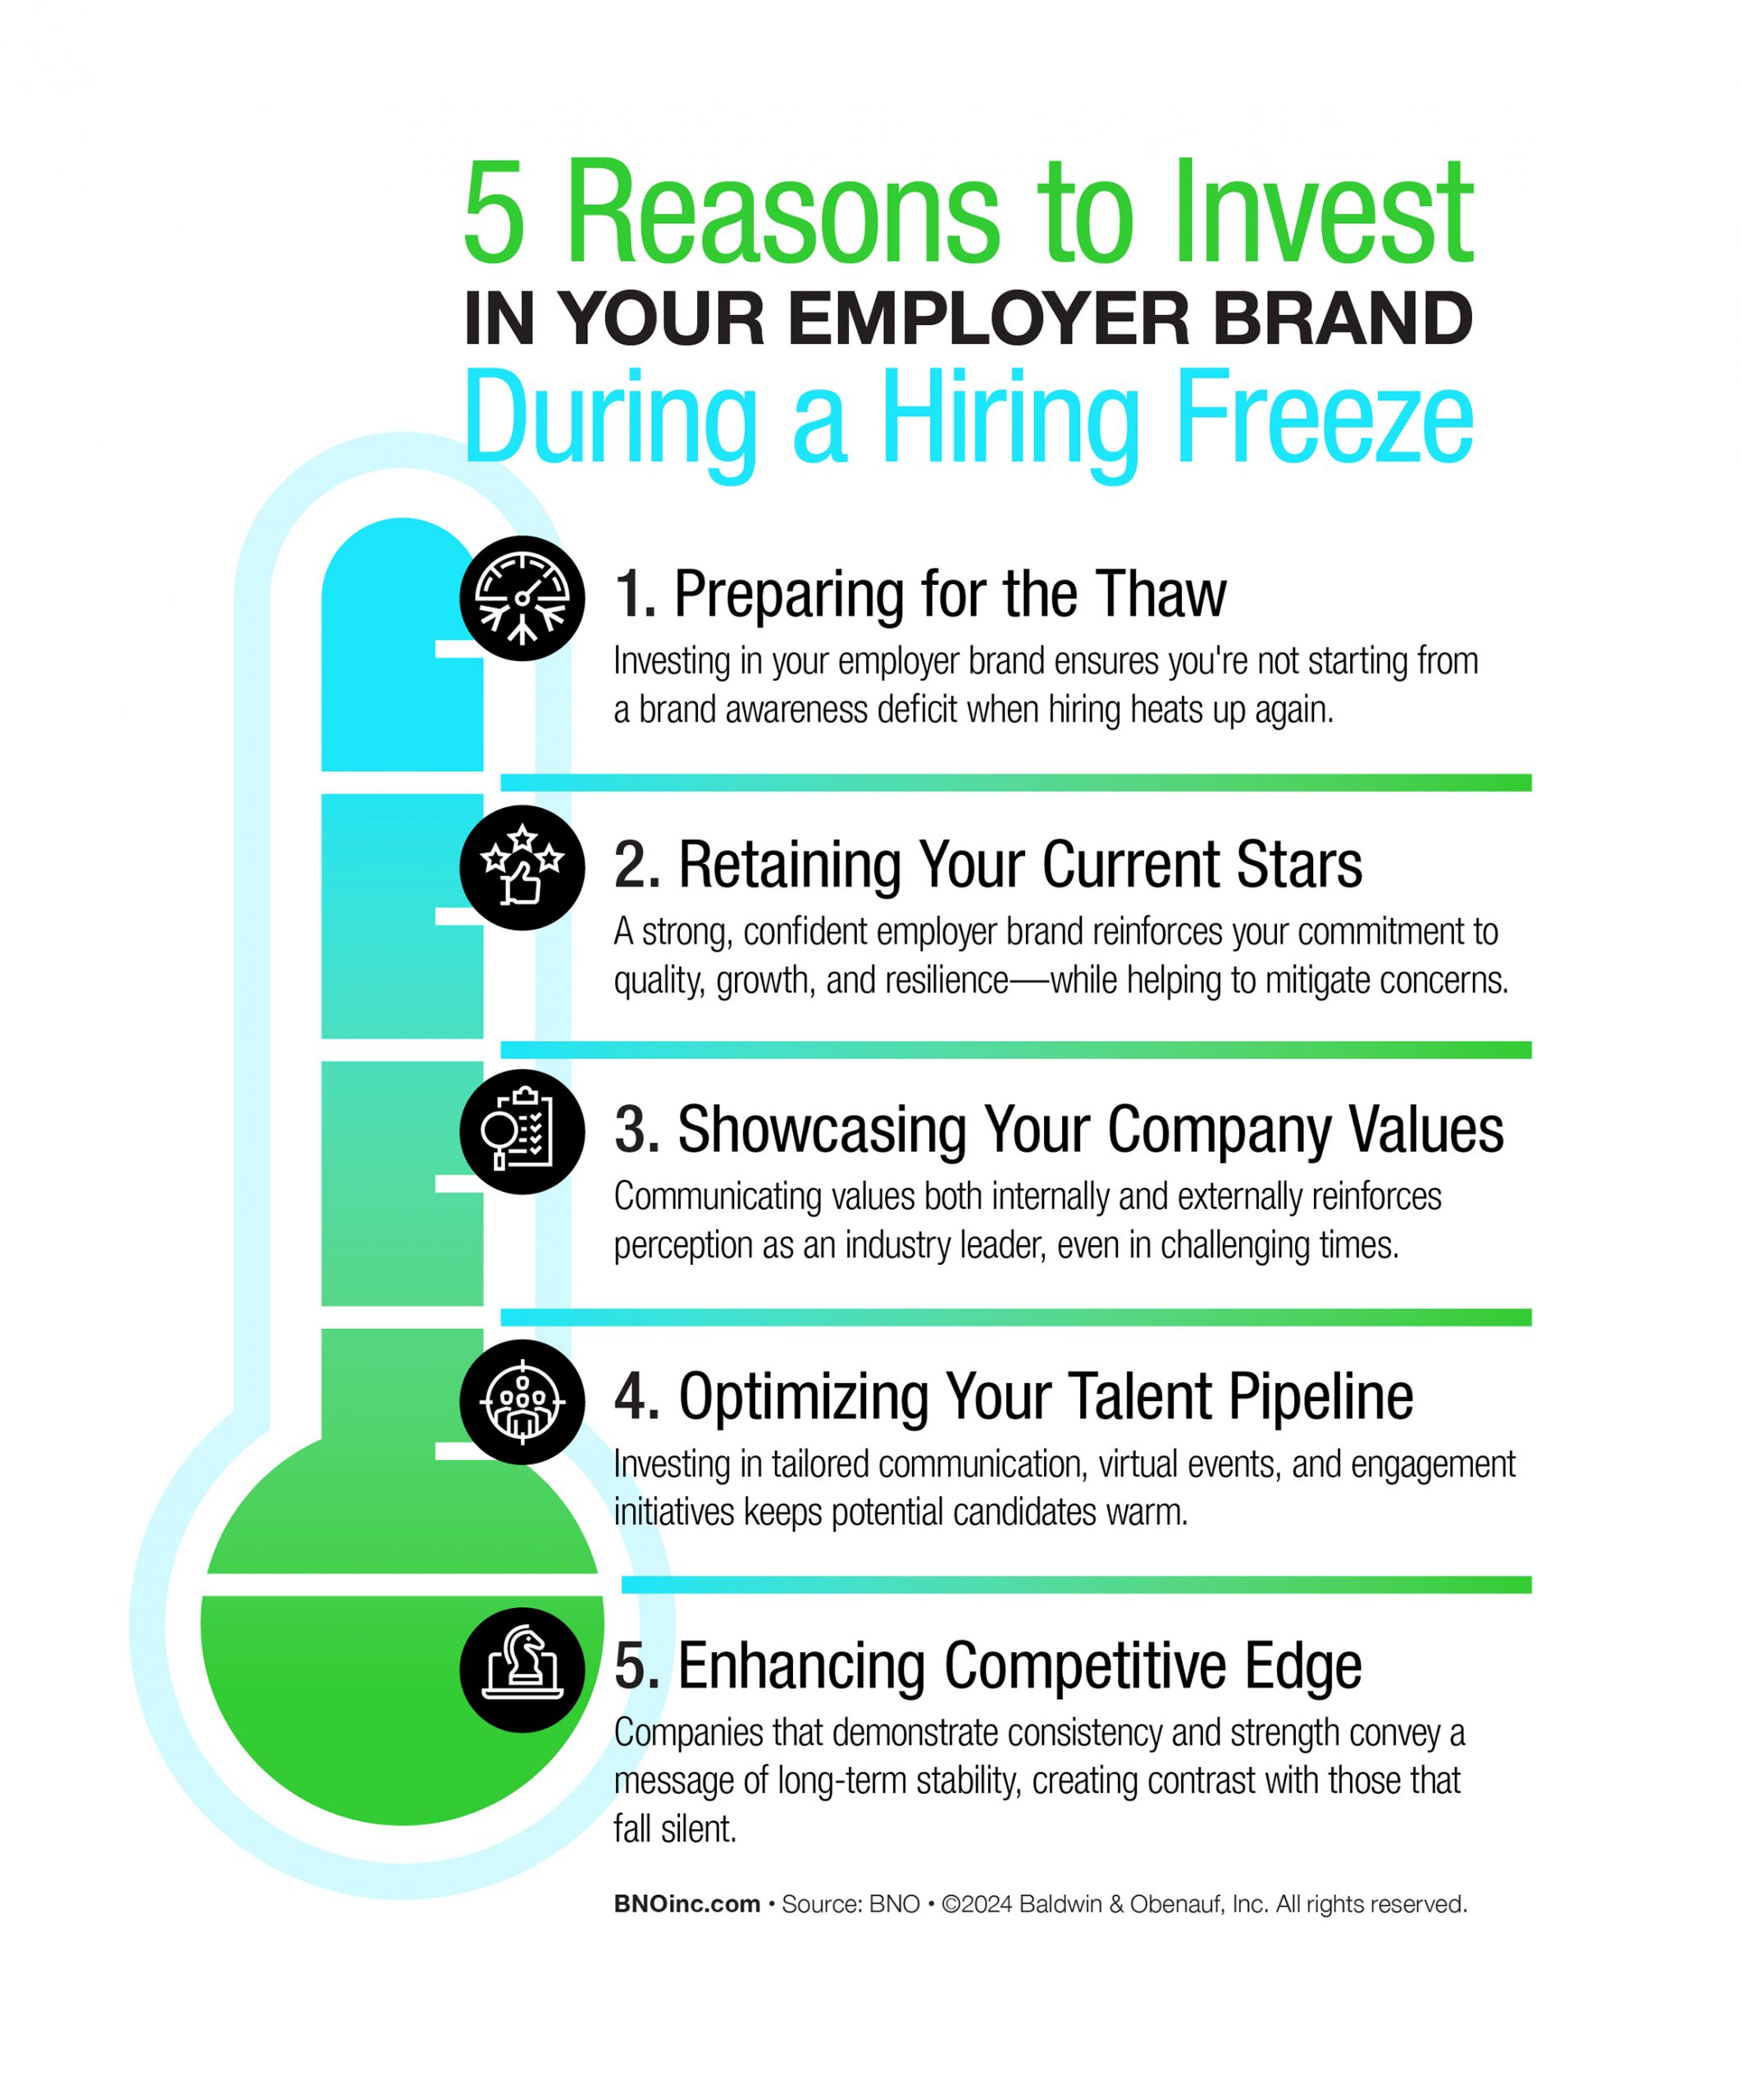 Infographic showing 5 Reasons to Invest in your employer brand during a hiring freeze.